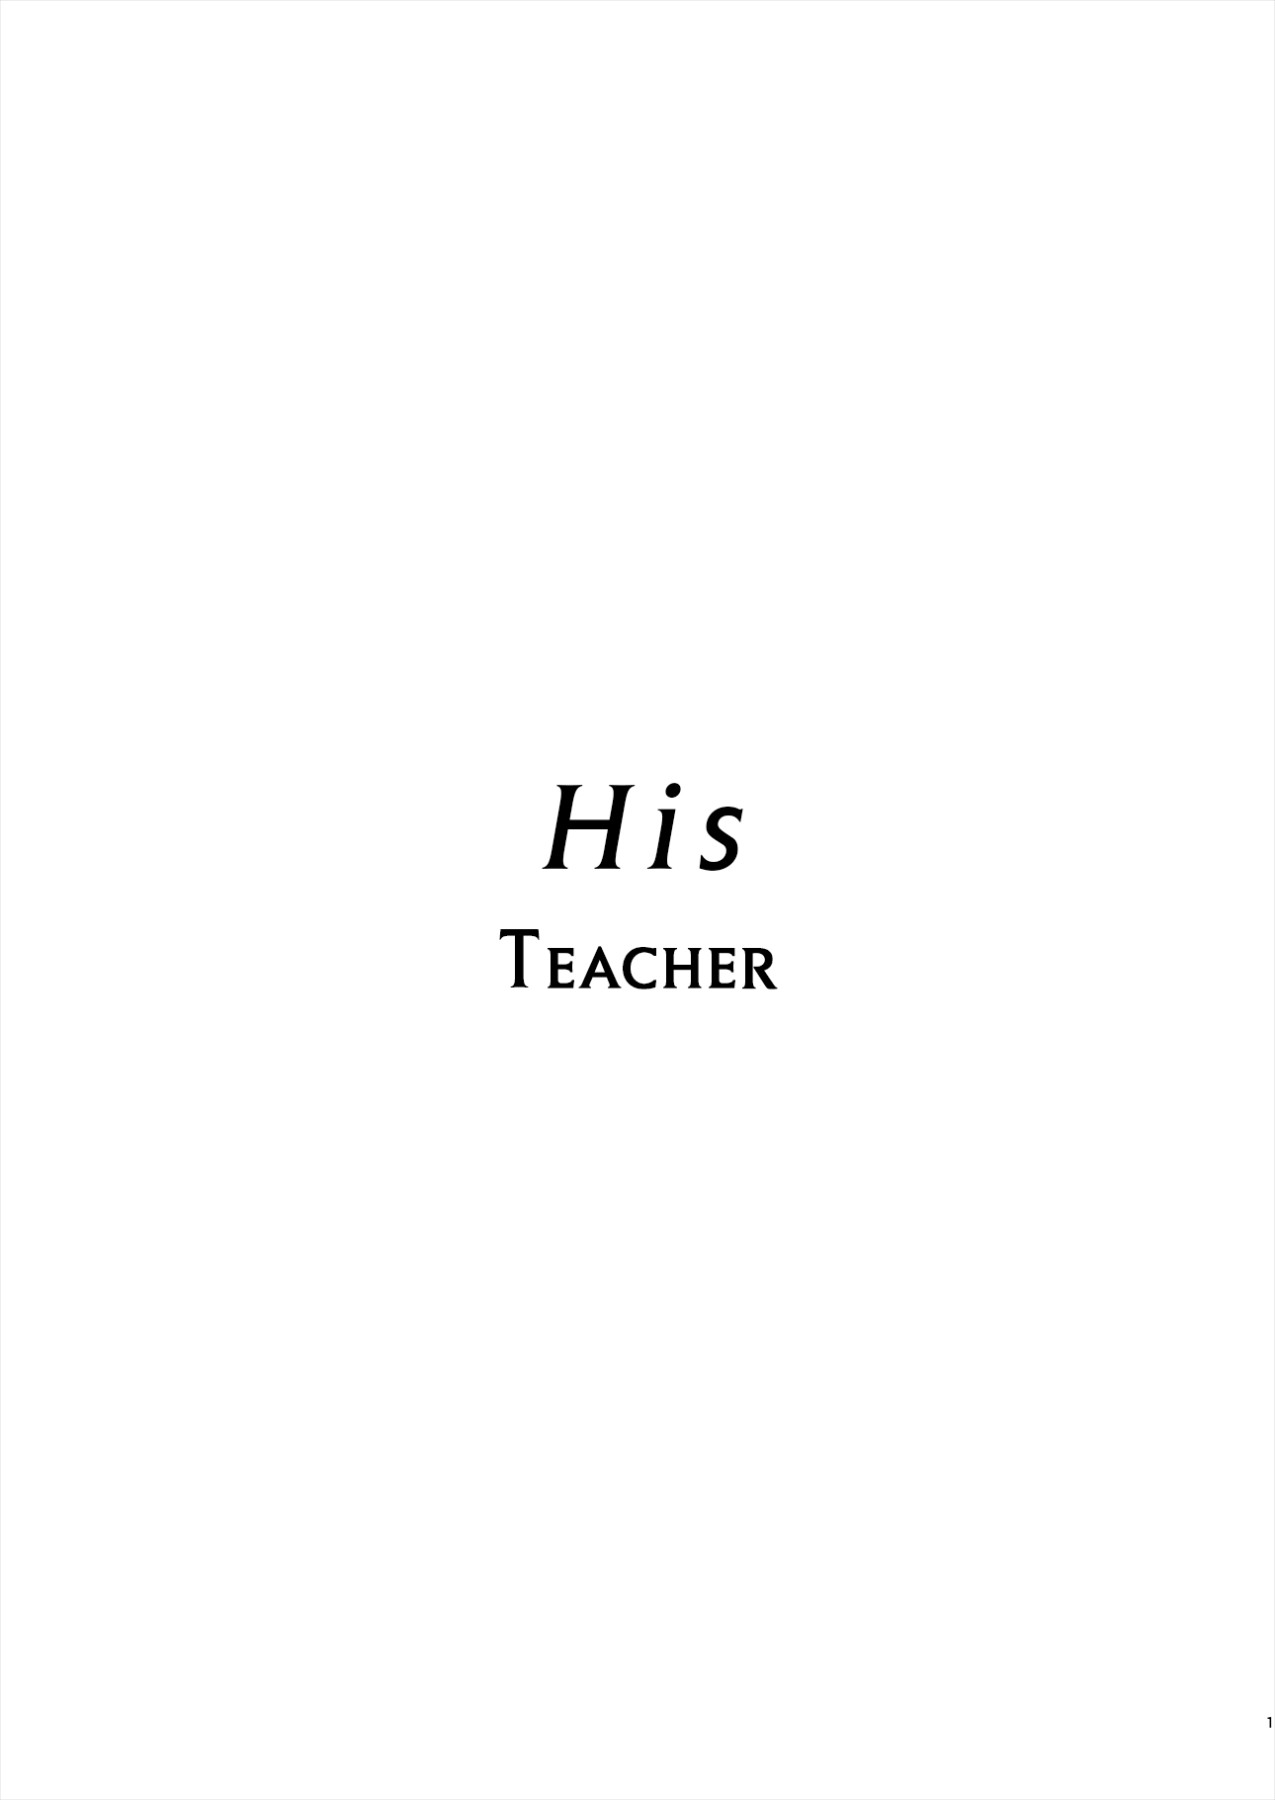 Hentai Manga Comic-My Teacher Who, Prior to Our Encounter, Has Been Leashed In-Read-2